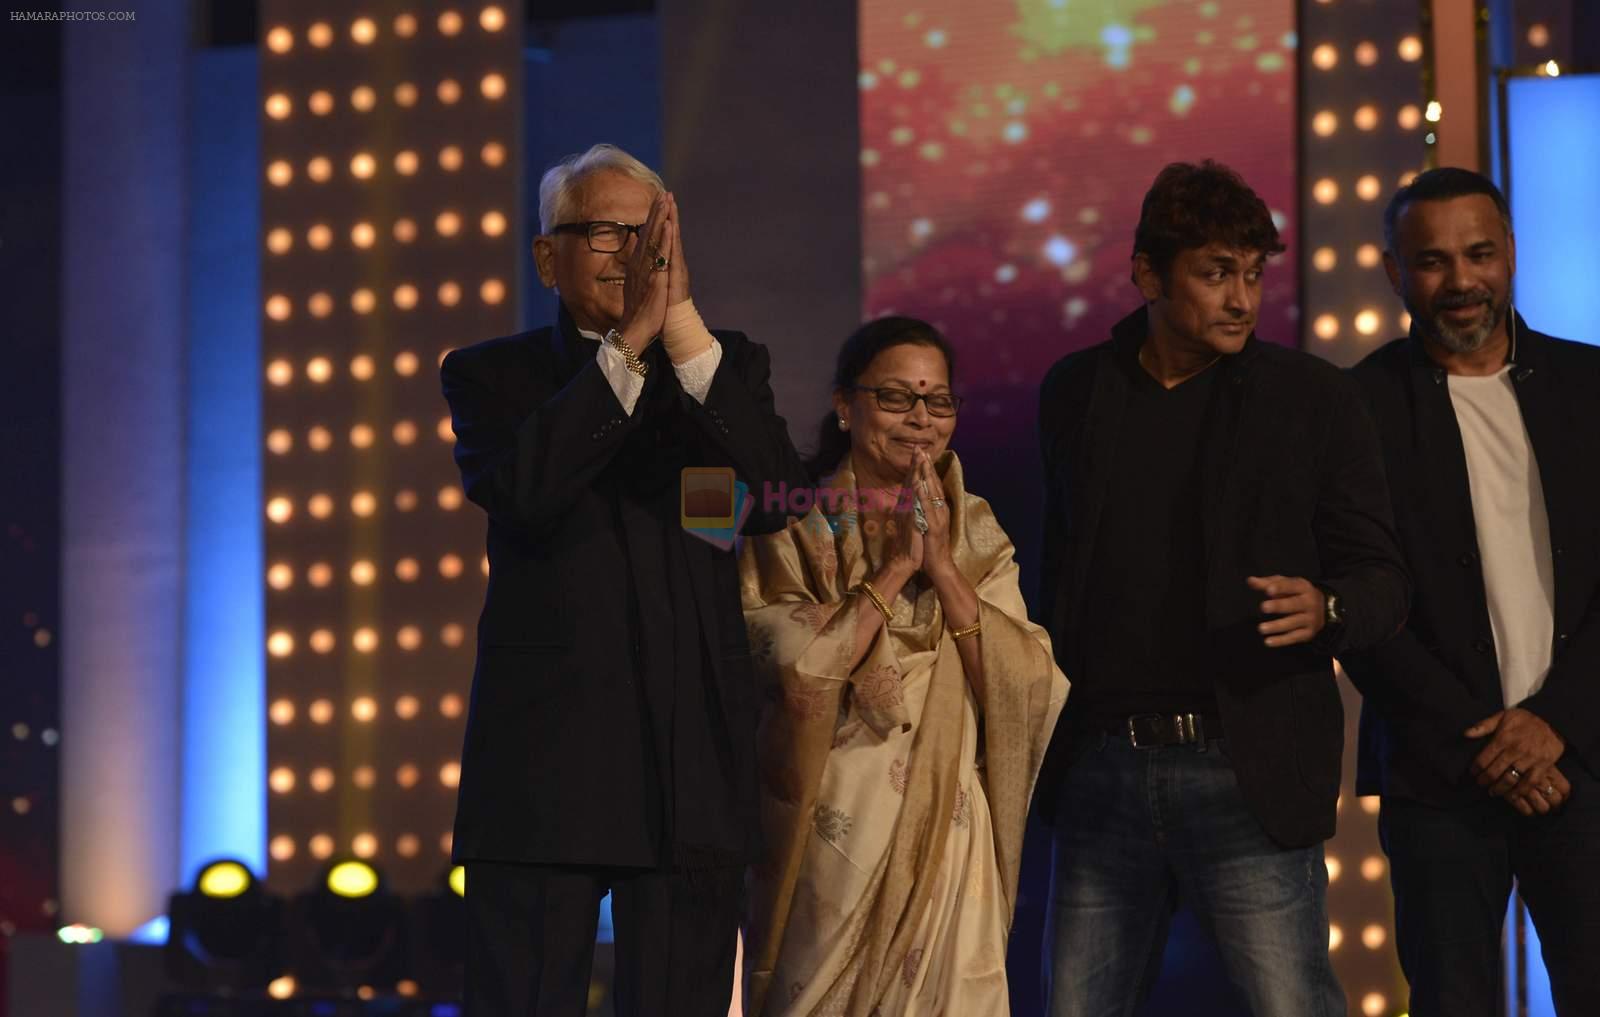 Ramesh Deo received Filmfare Life Time Achievement Awards by wife Seema Deo